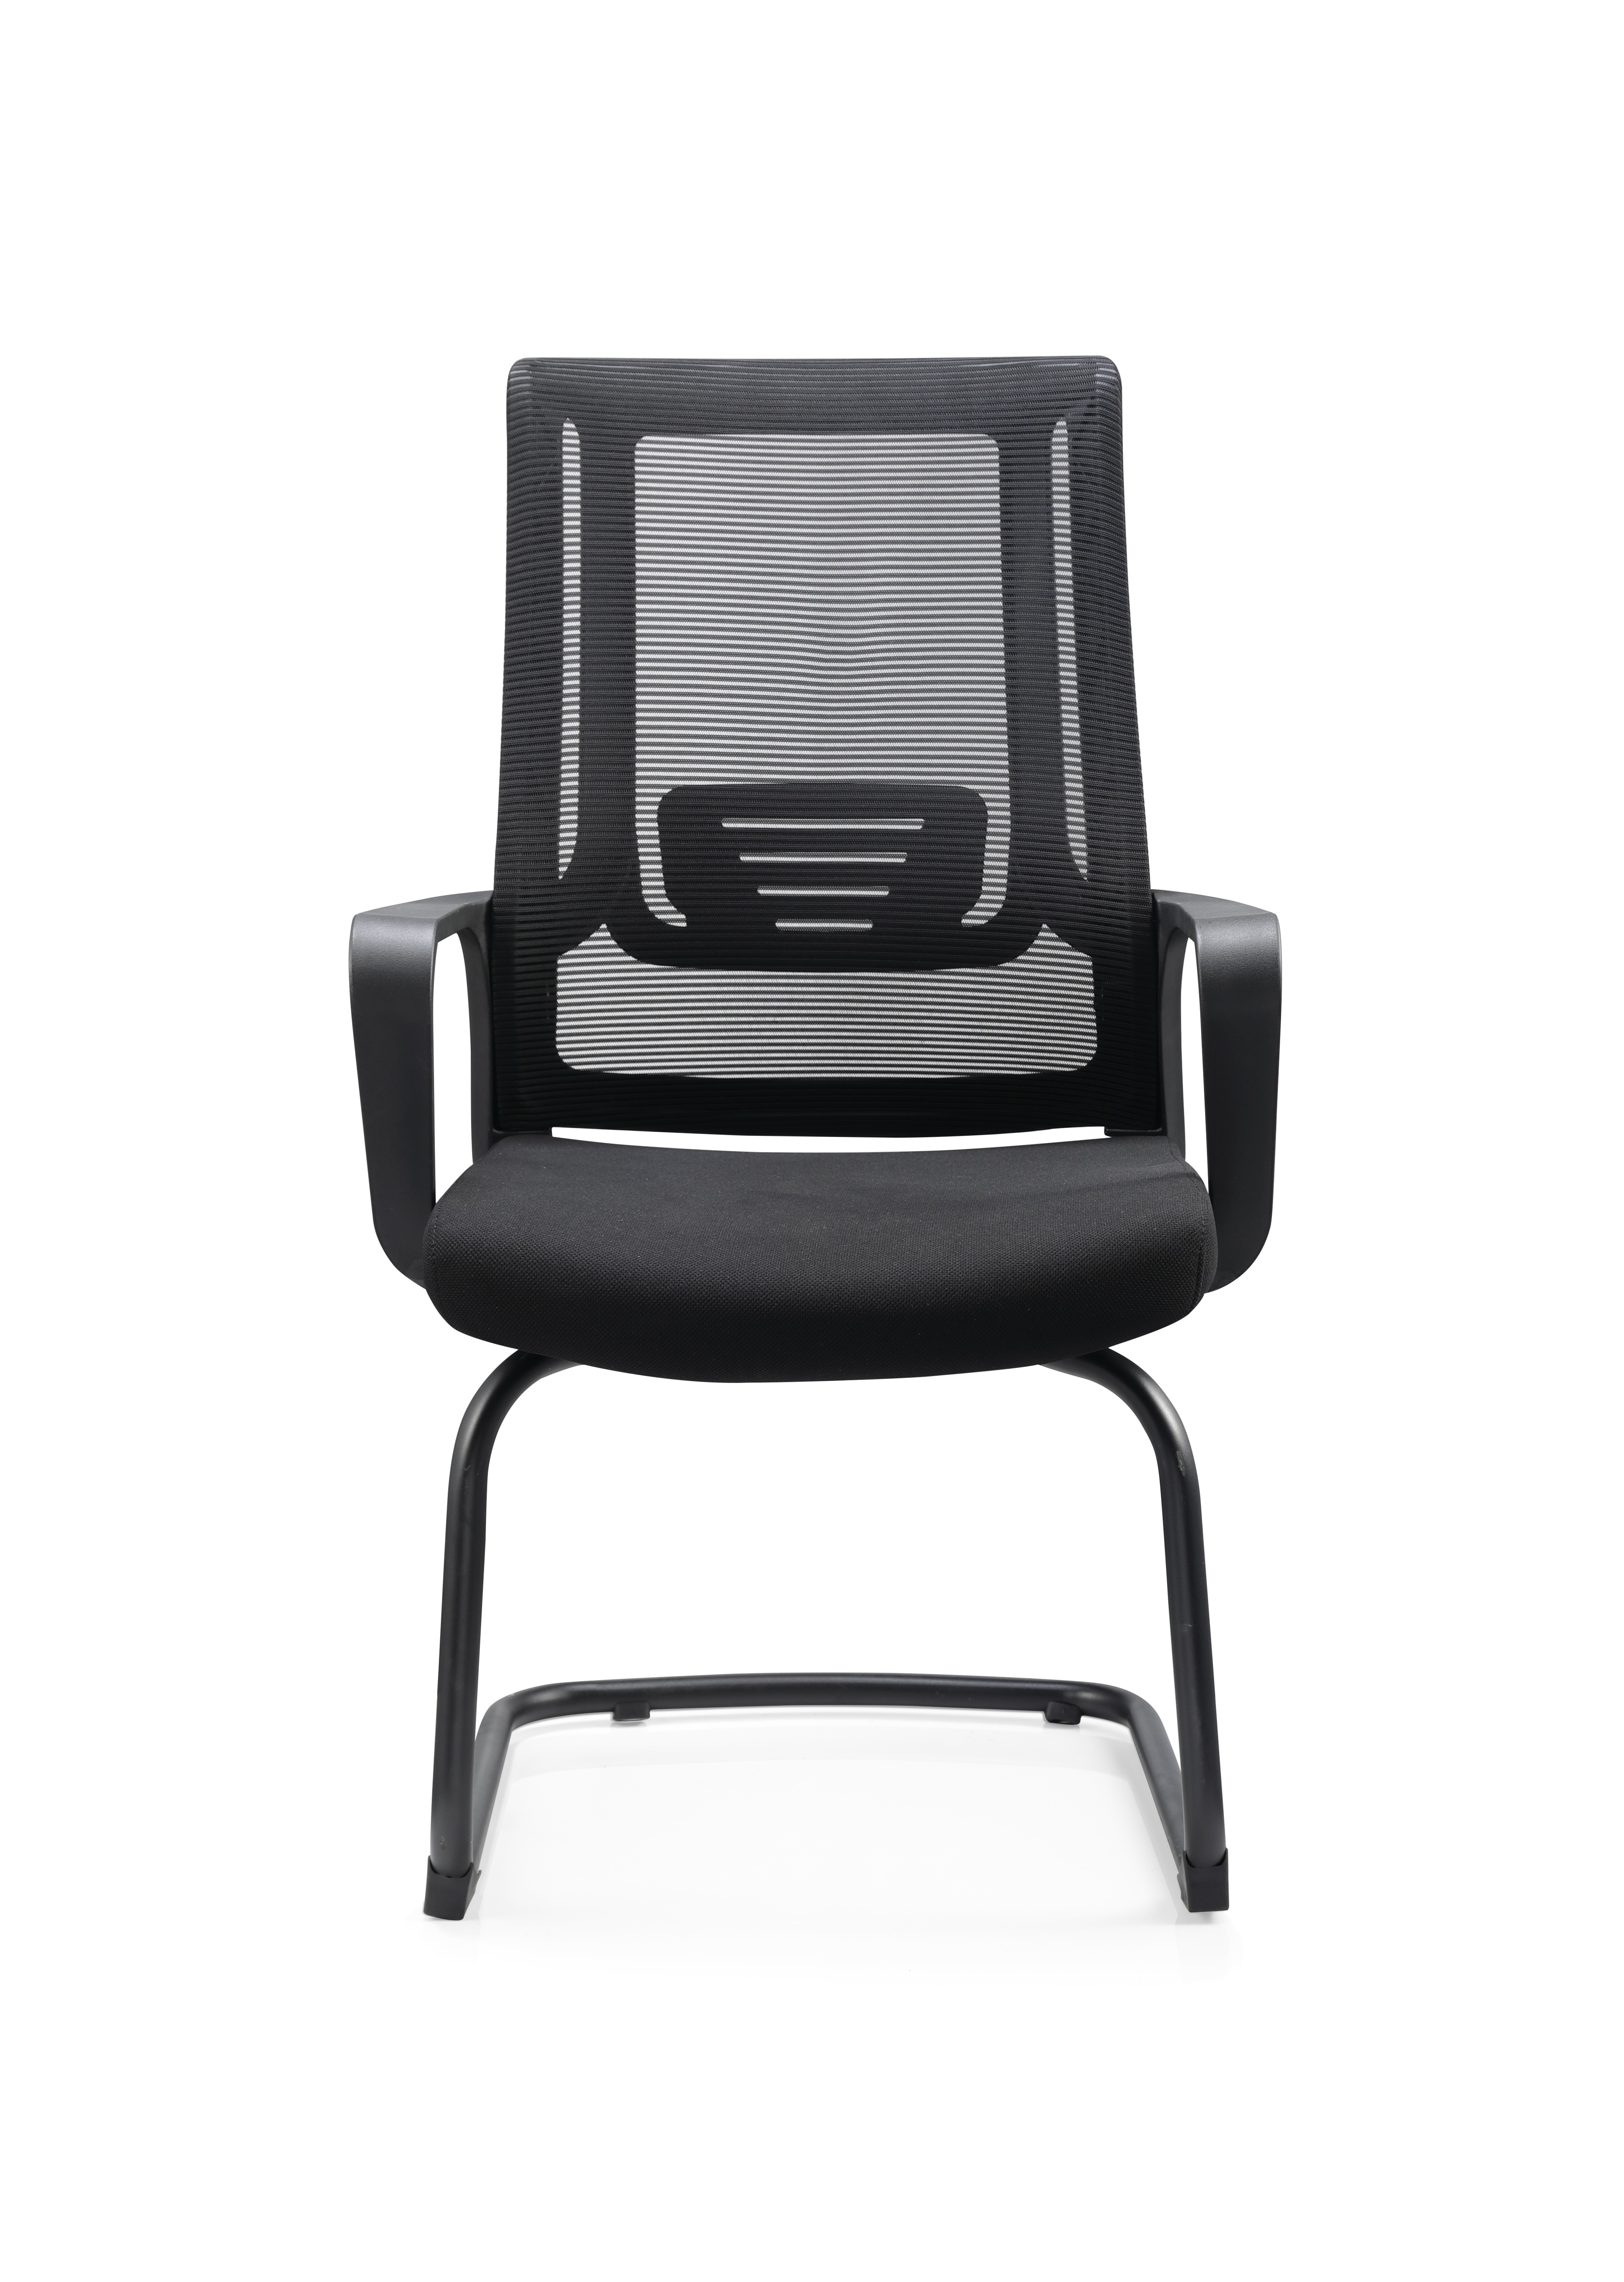 China Newcity 530C Office Furniture Conference Visitor Chair Meeting Mesh Chair Metal Frame Reception Room Visitor Chairs Fabric Computer Economic Visitor Chair Supplier Foshan China manufacturer